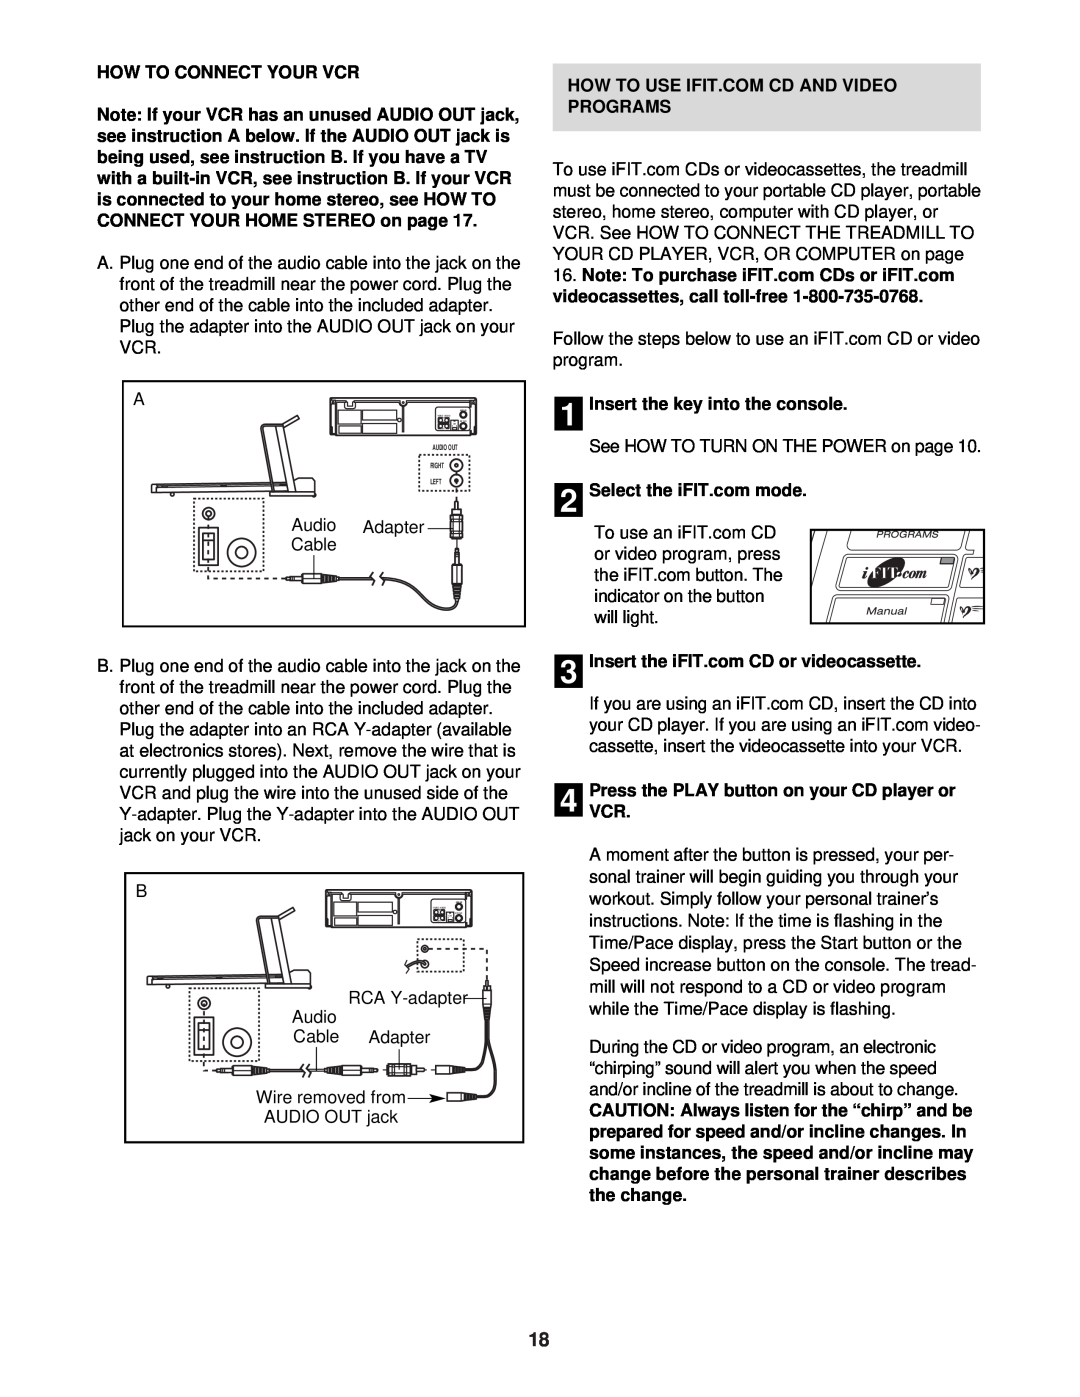 ProForm PFTL91330 user manual How To Connect Your Vcr, How To Use Ifit.Com Cd And Video Programs, Audio, Adapter, Cable 